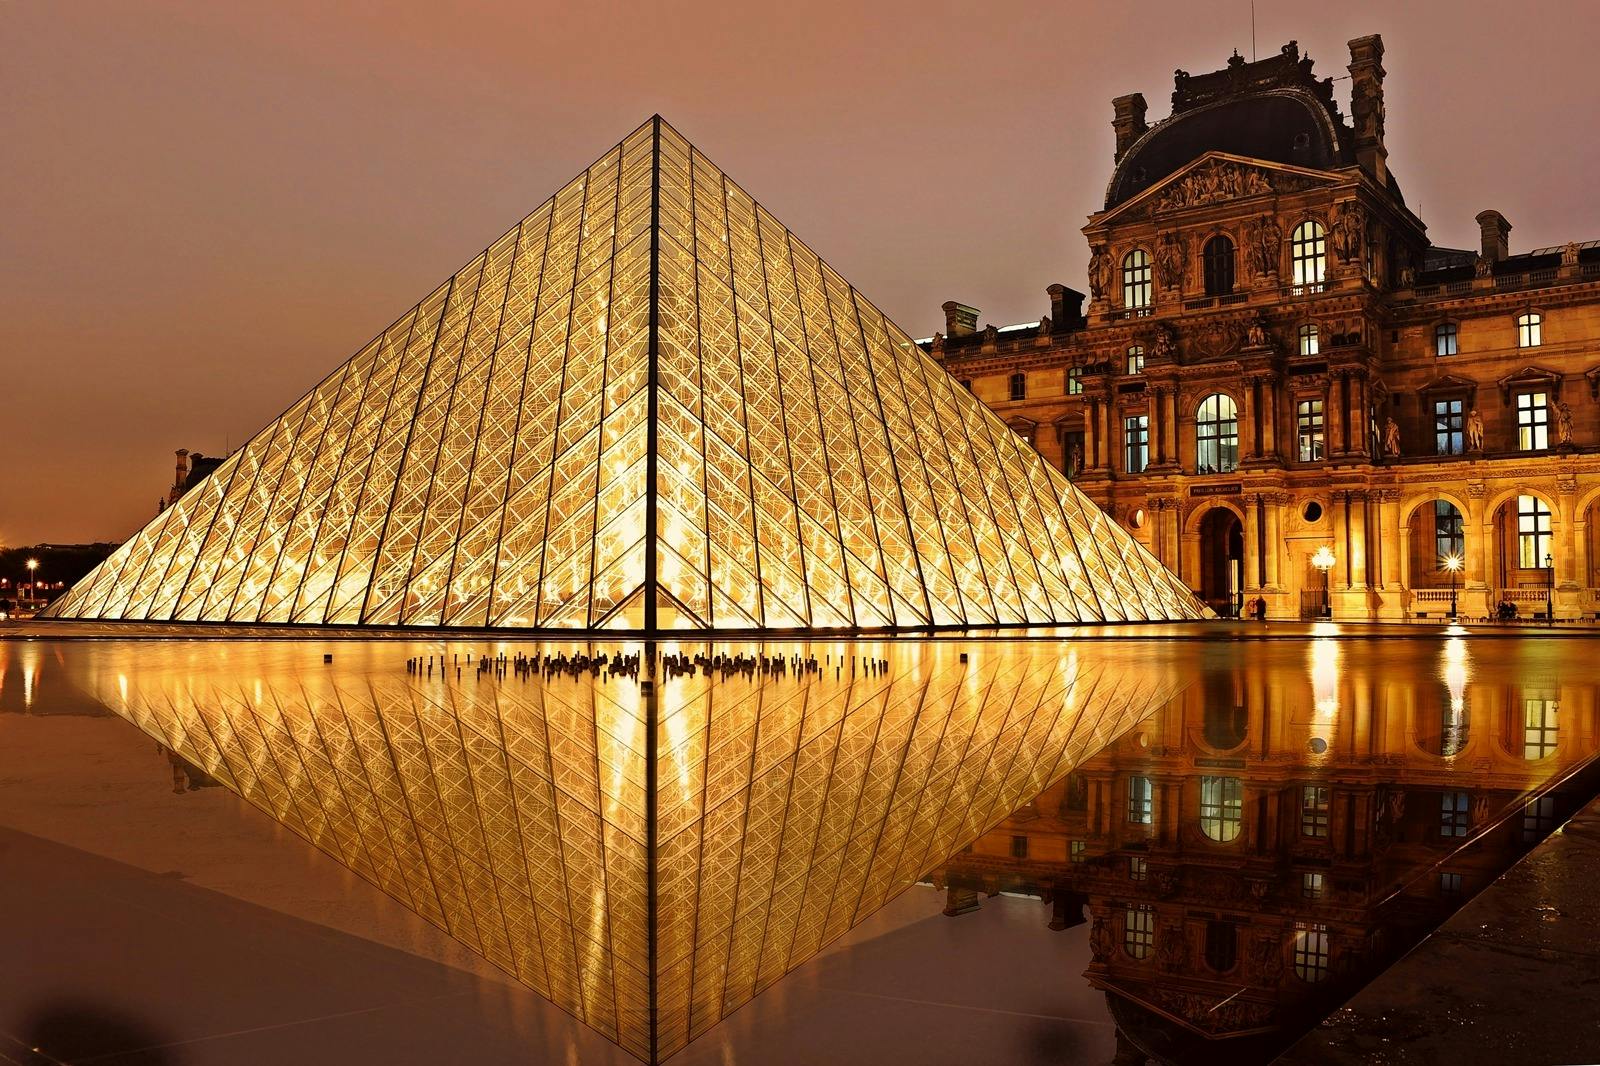 The pyramid in front of the Louvre museum in Paris